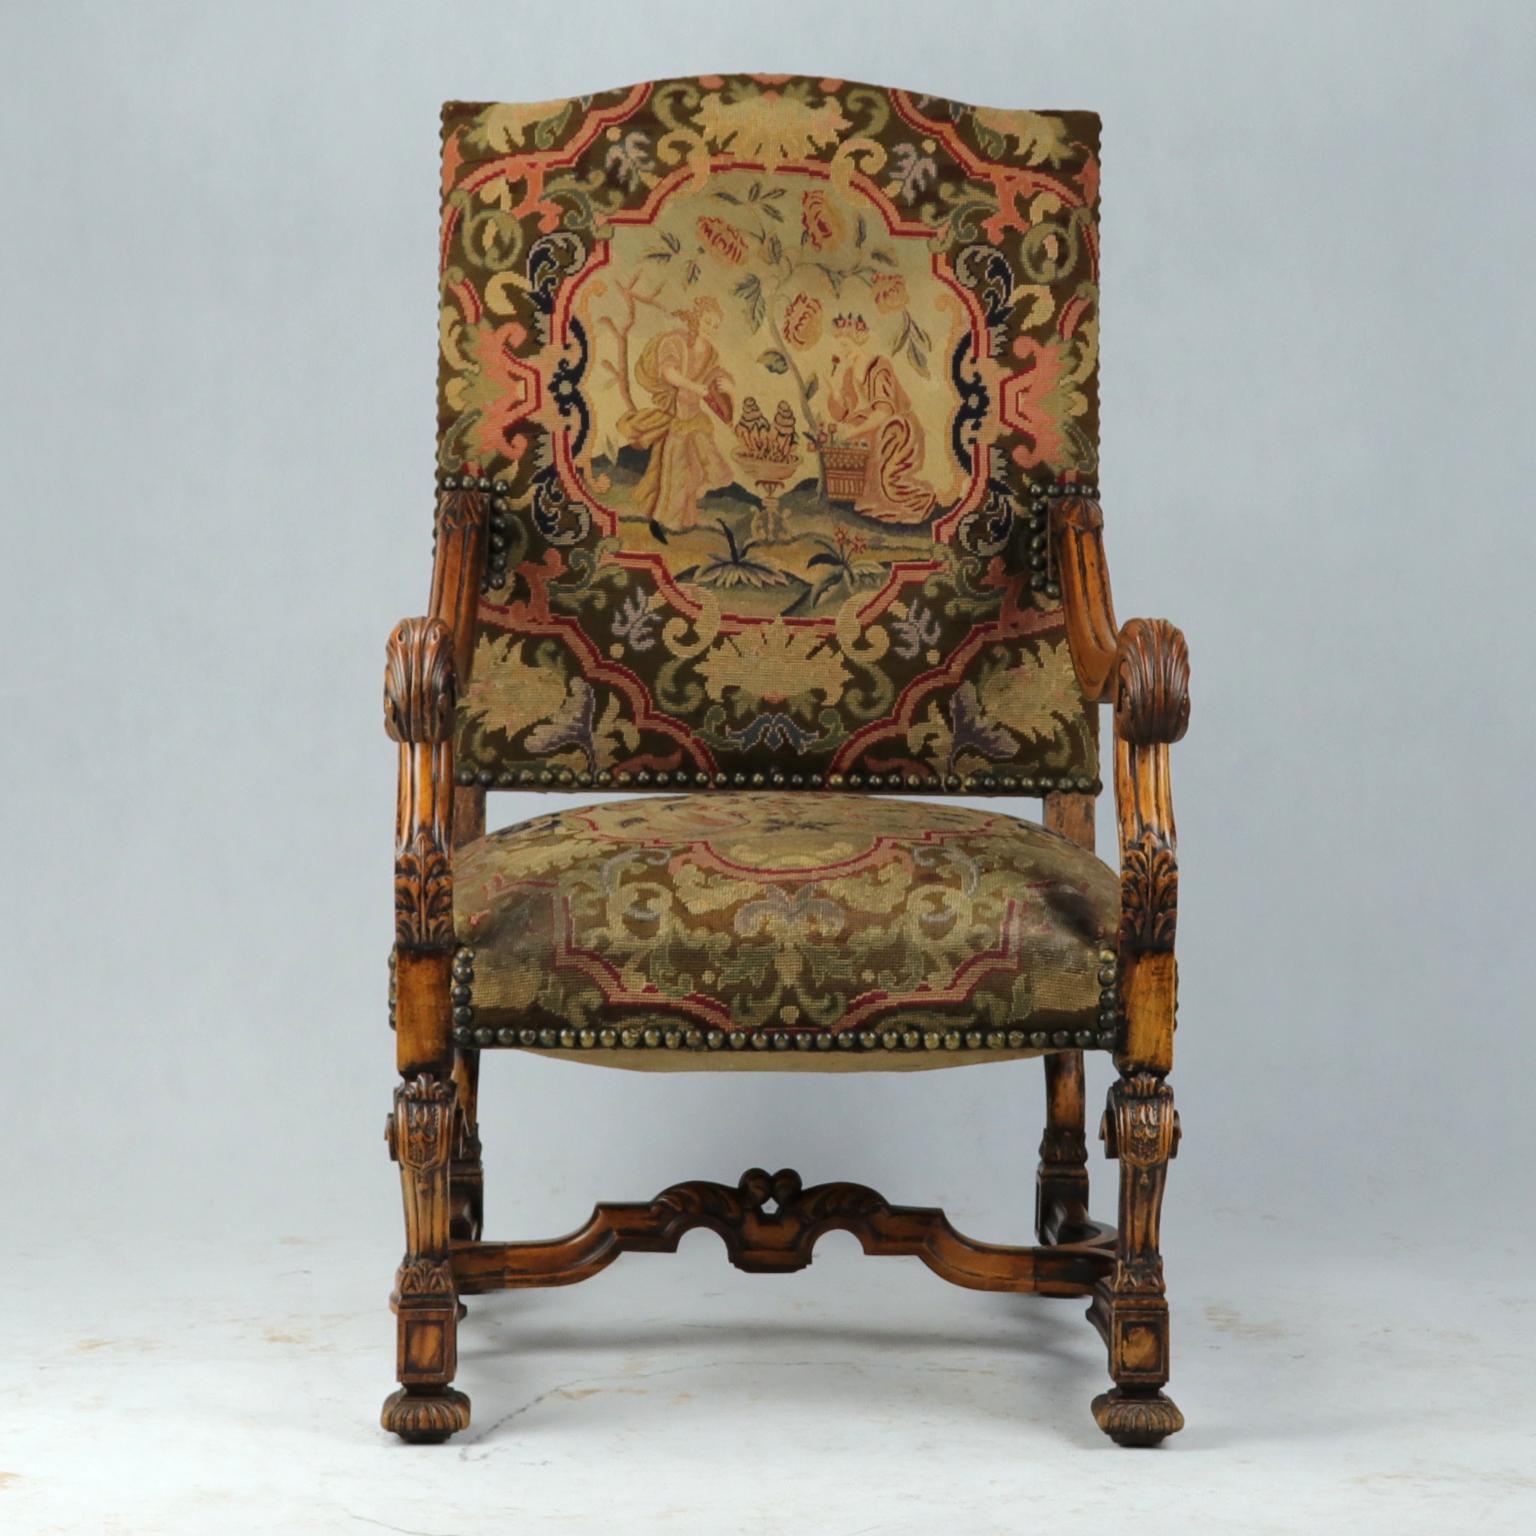 A very good large fruitwood Louis XIV armchair with slightly slanted rectangular high backrest and padded seat. With floral carved scrolled arms. On carved legs linked by a 'H' shaped stretcher. The chair upholstered in original fine wool tapestry.